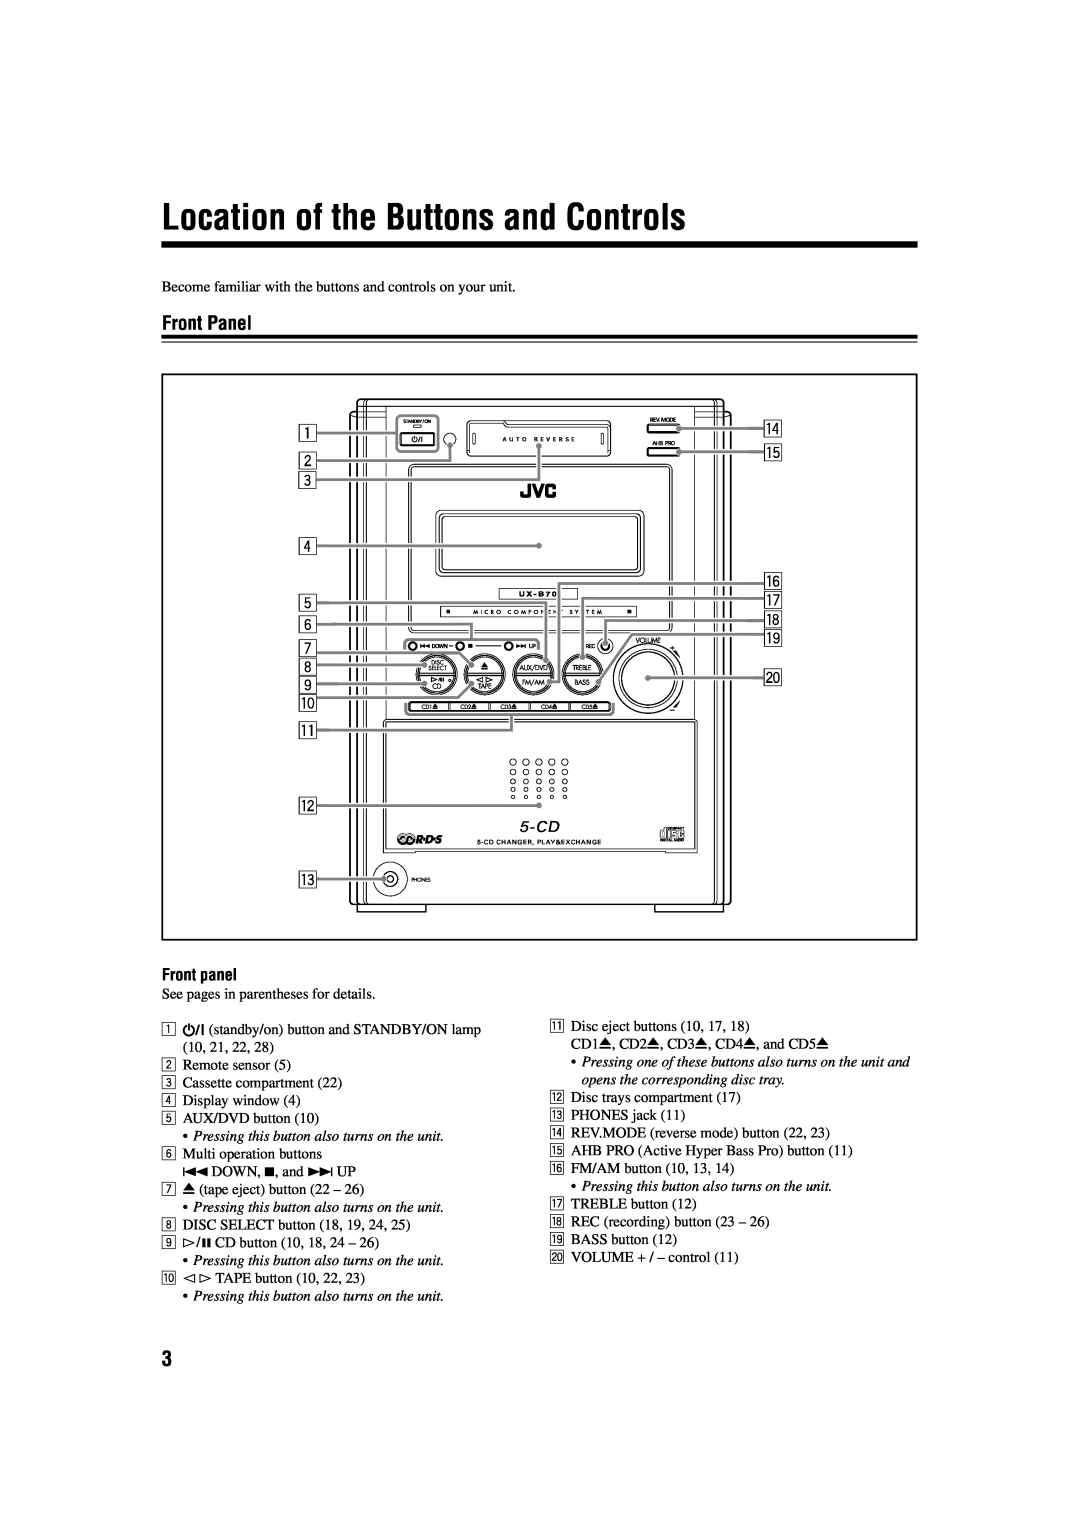 JVC CA-UXB70, SP-UXB70 manual Location of the Buttons and Controls, Front Panel 